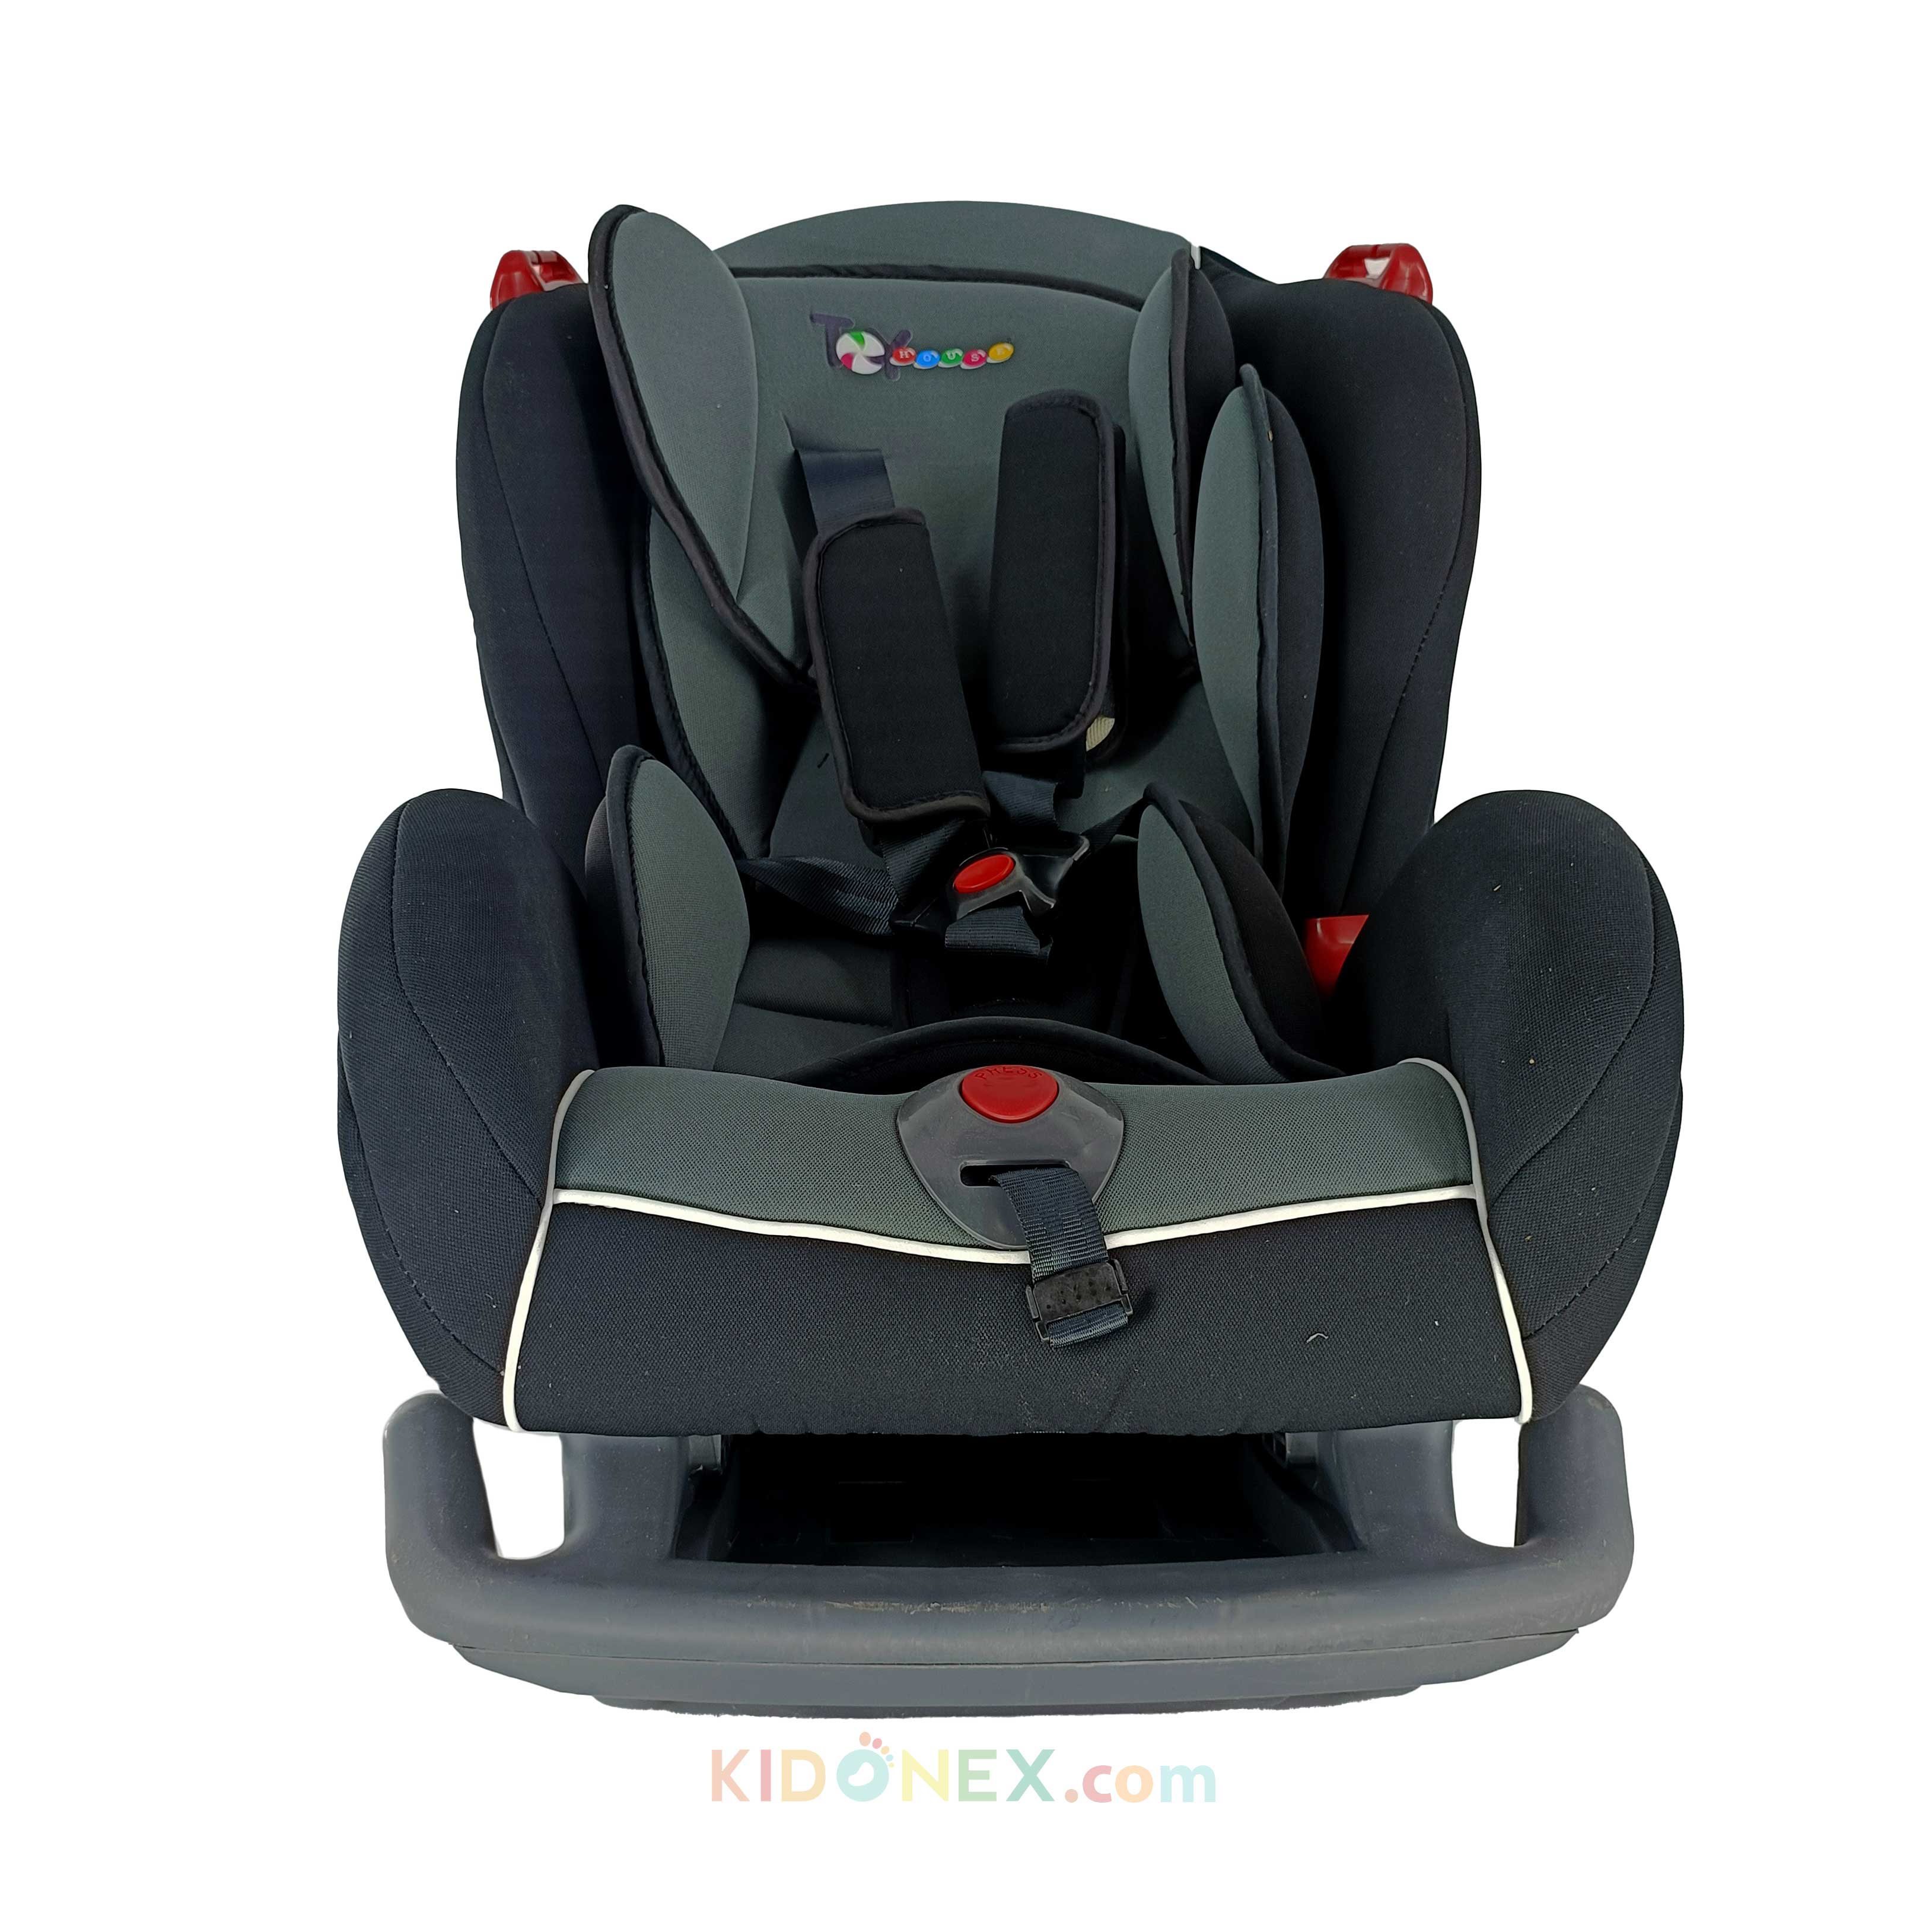 Car Seat for Kids of 0 to 5 Years Age (Black & Grey)